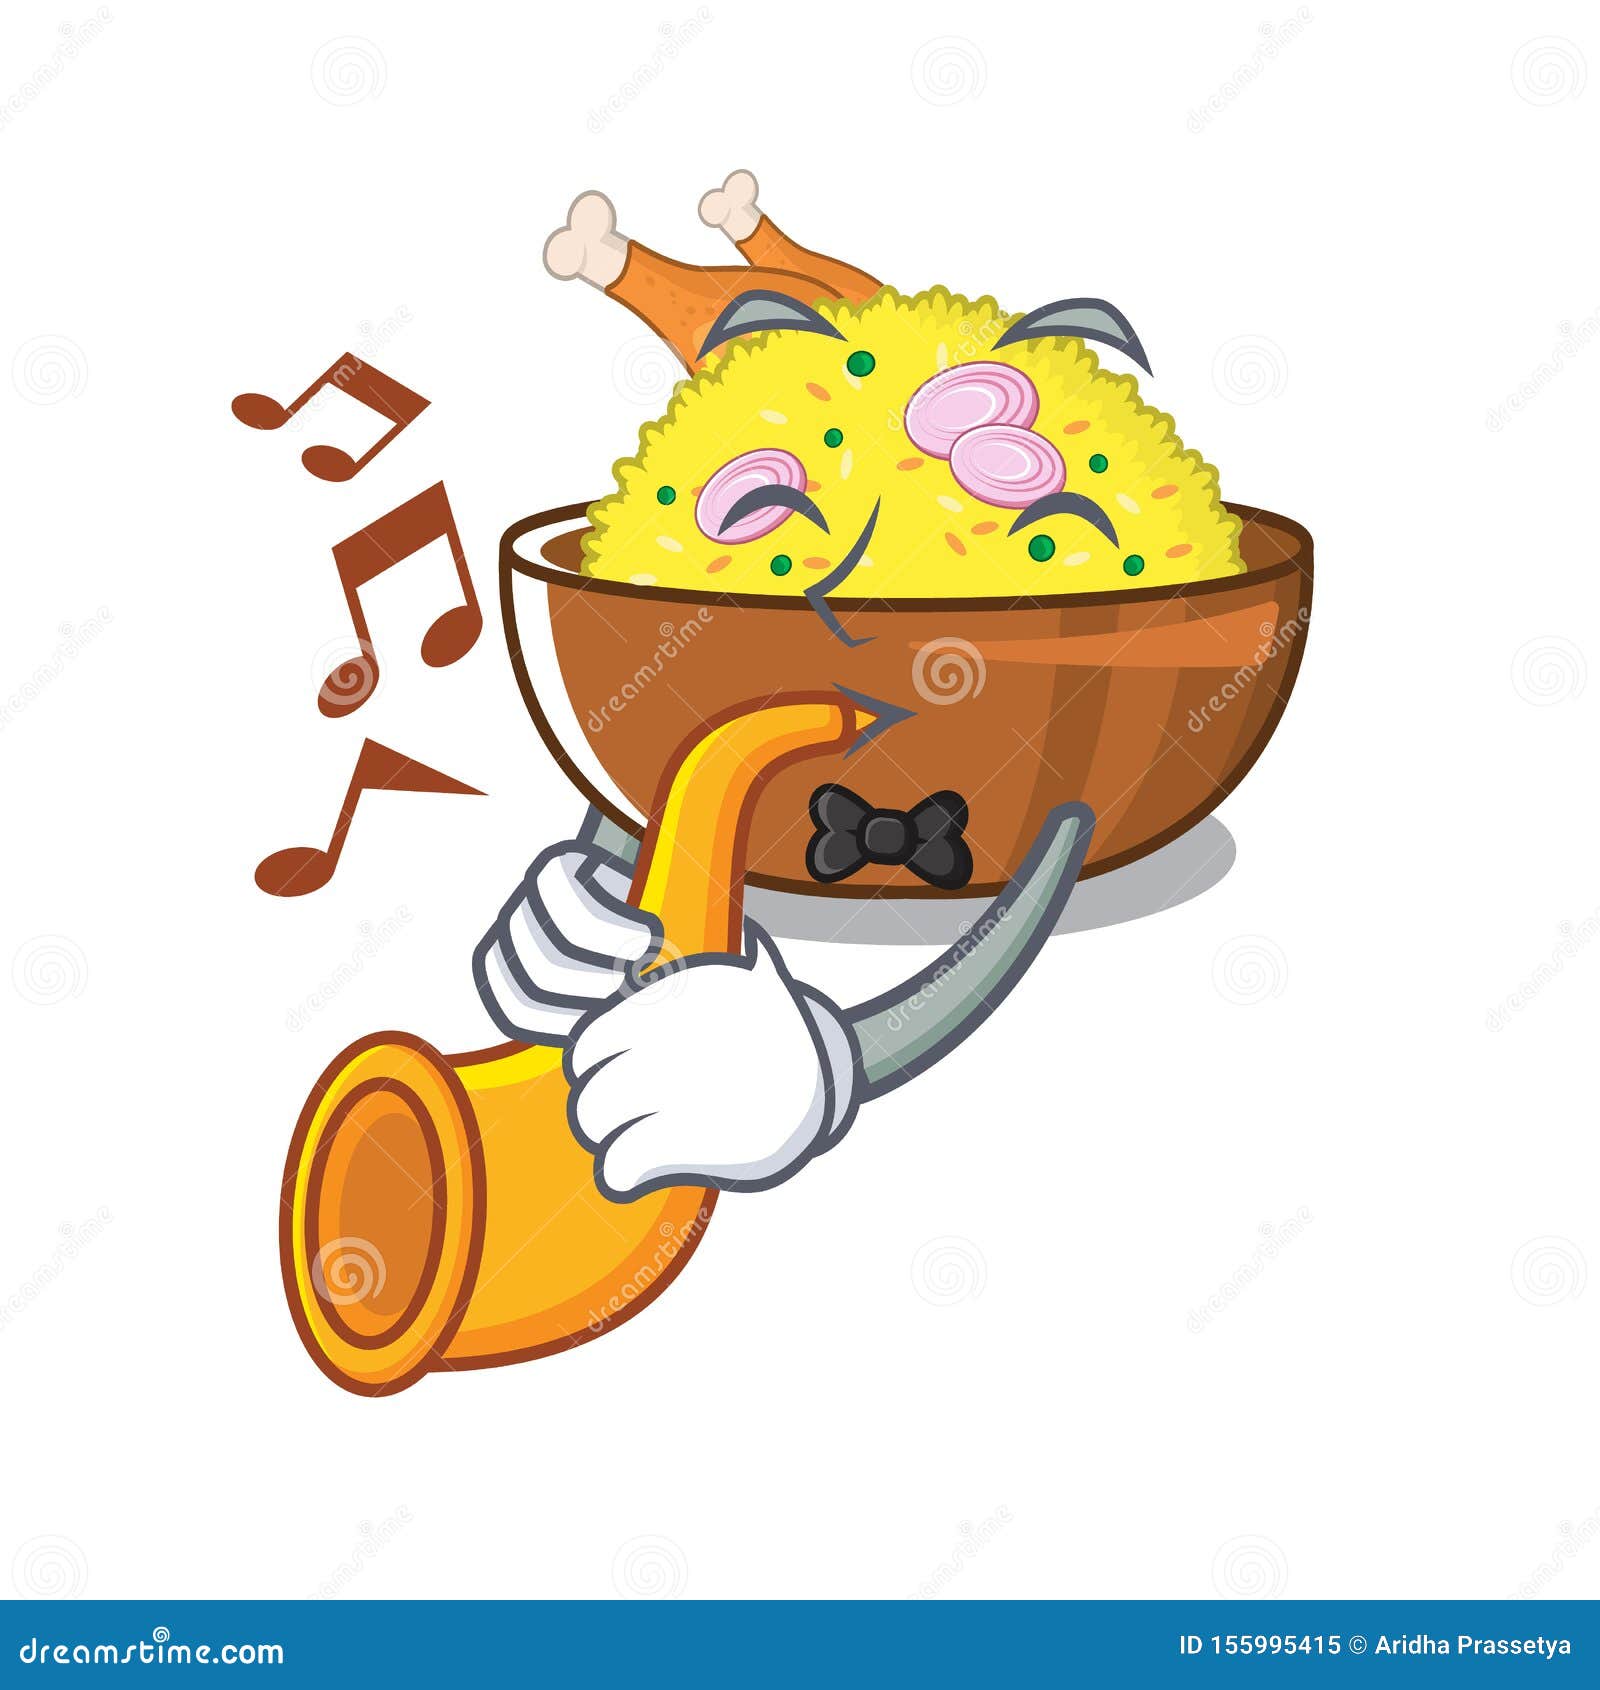 With Trumpet Chicken Biryani Isolated in the Mascot Stock Vector -  Illustration of food, cartoon: 155995415